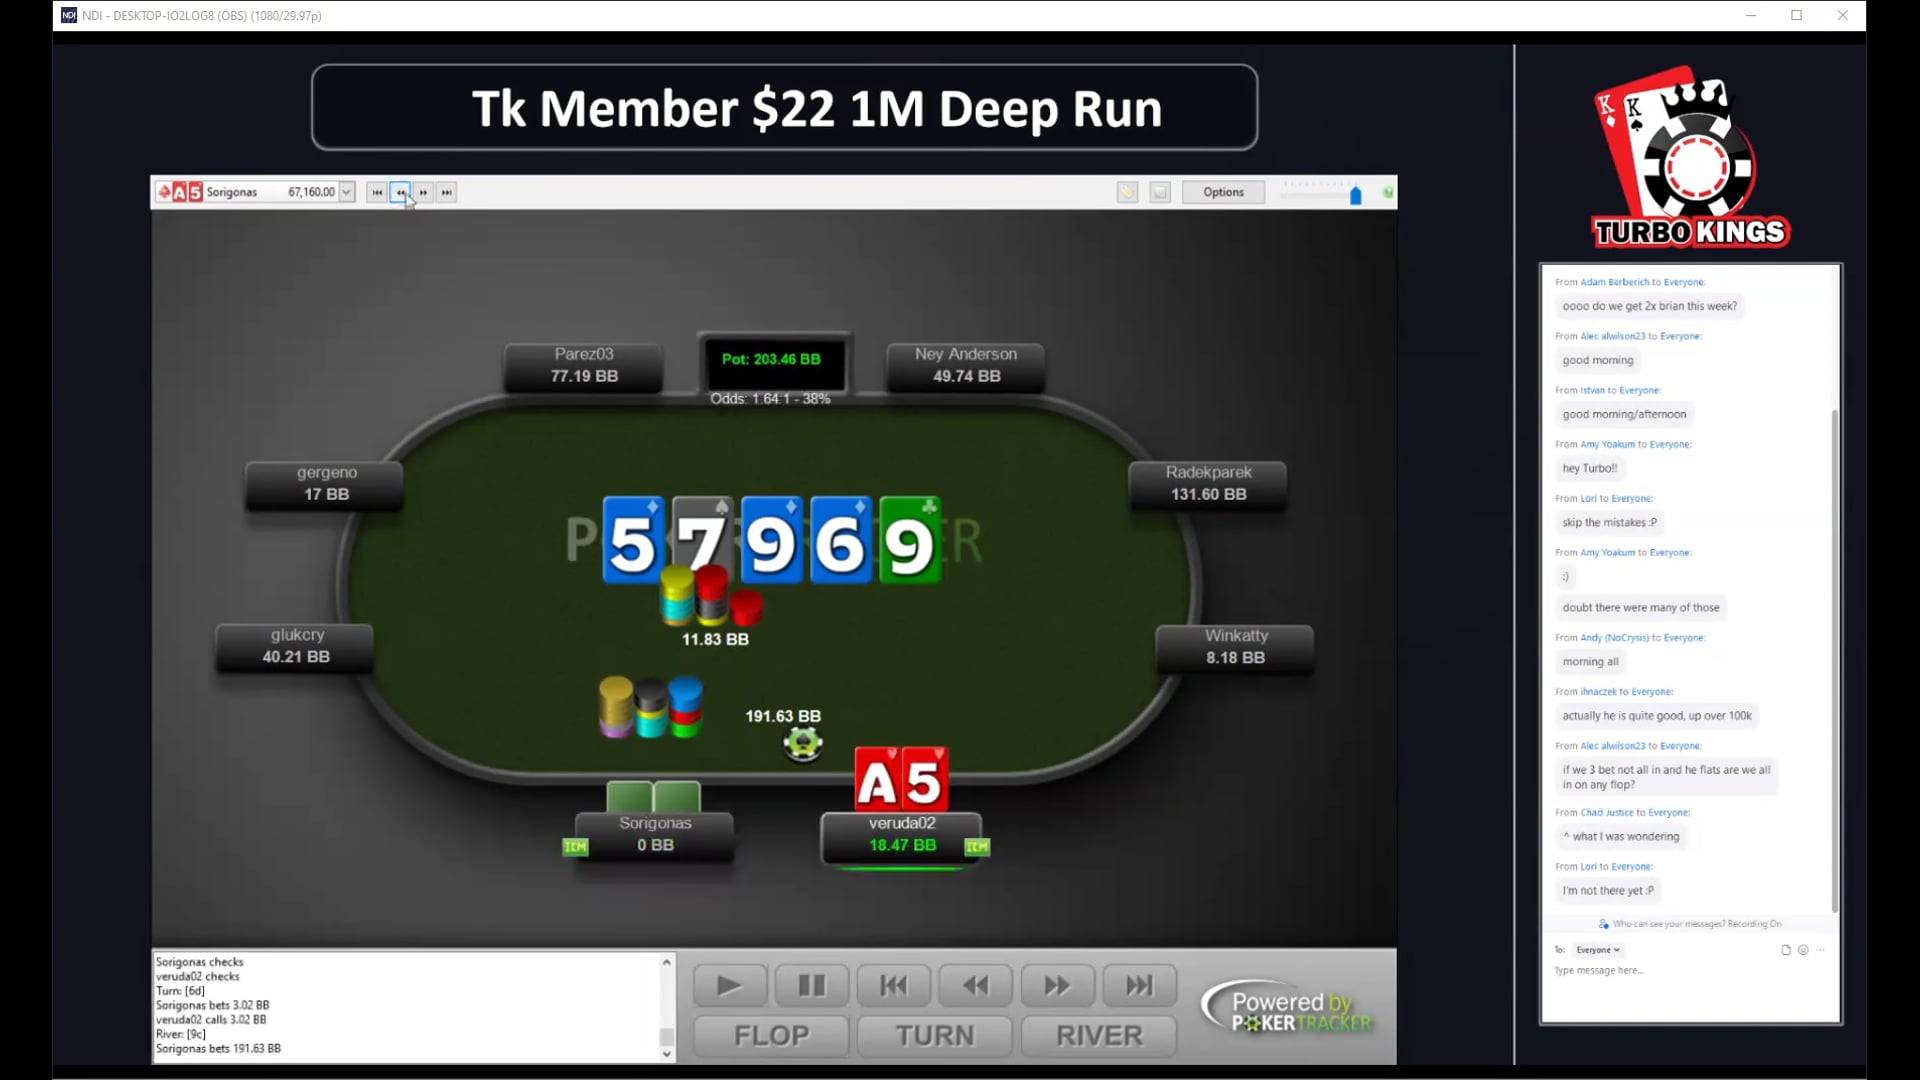 2021_08_06 - Brian - 22$ 1 Milly GTD Student HH Part 2